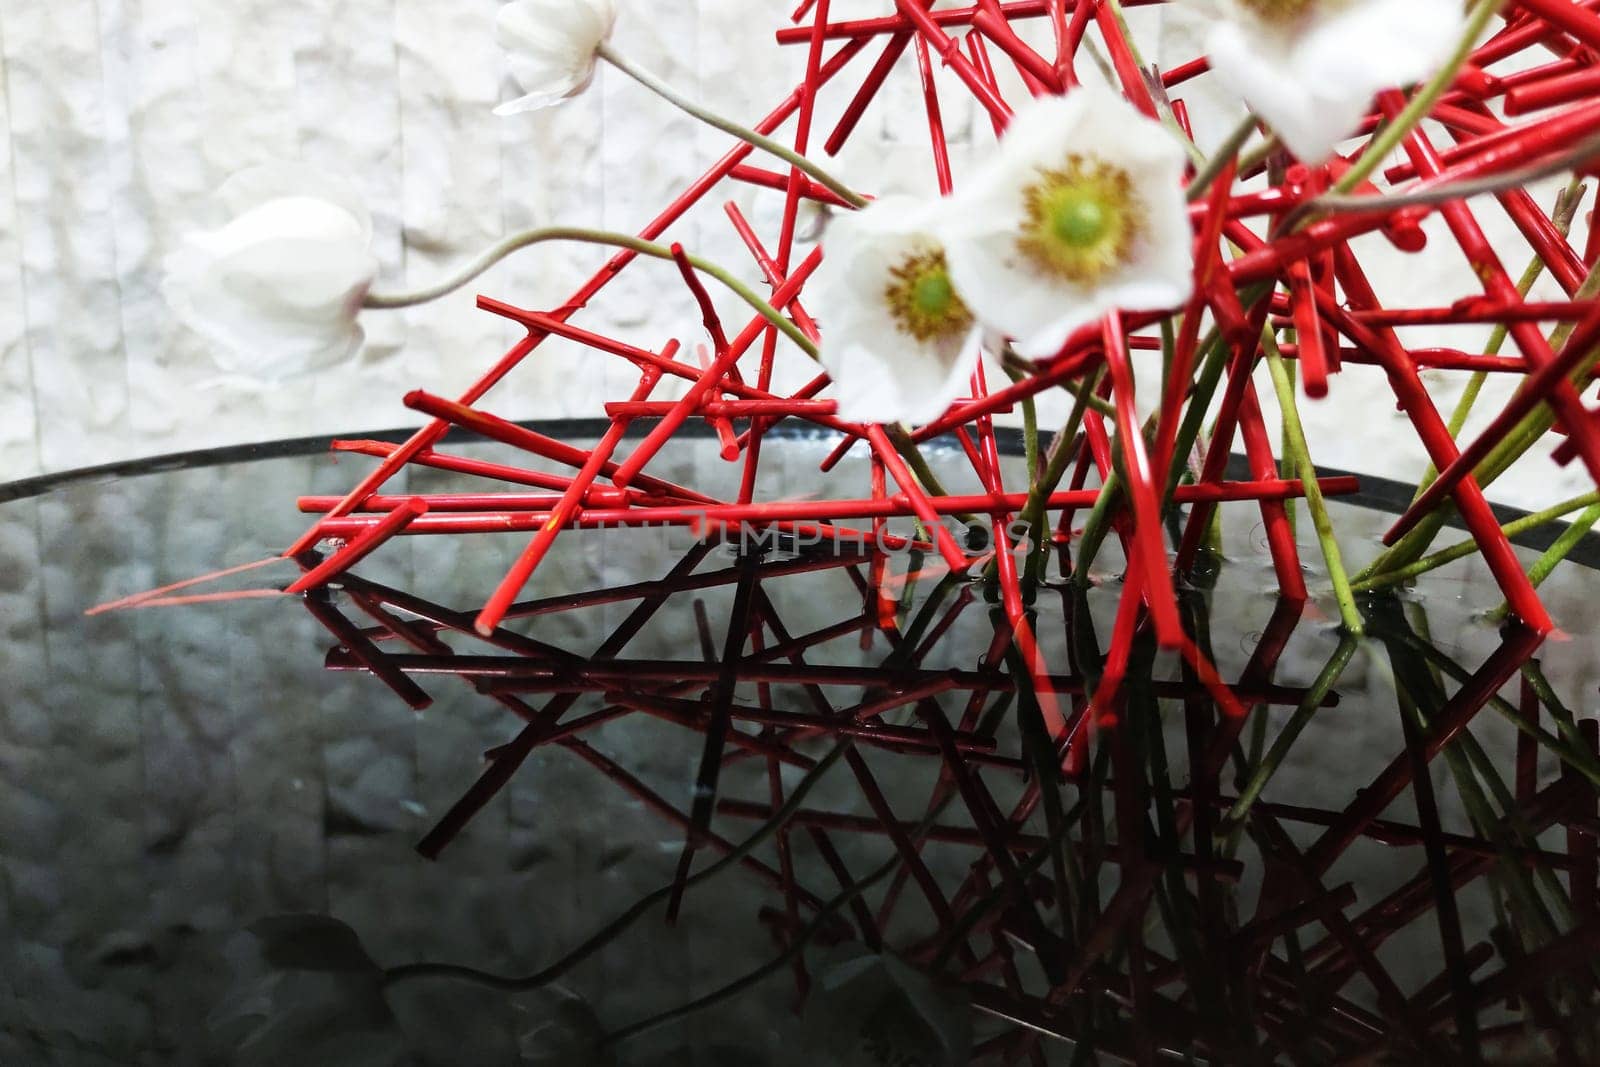 ikebana of red twigs and white flowers in a flat vase with water close-up